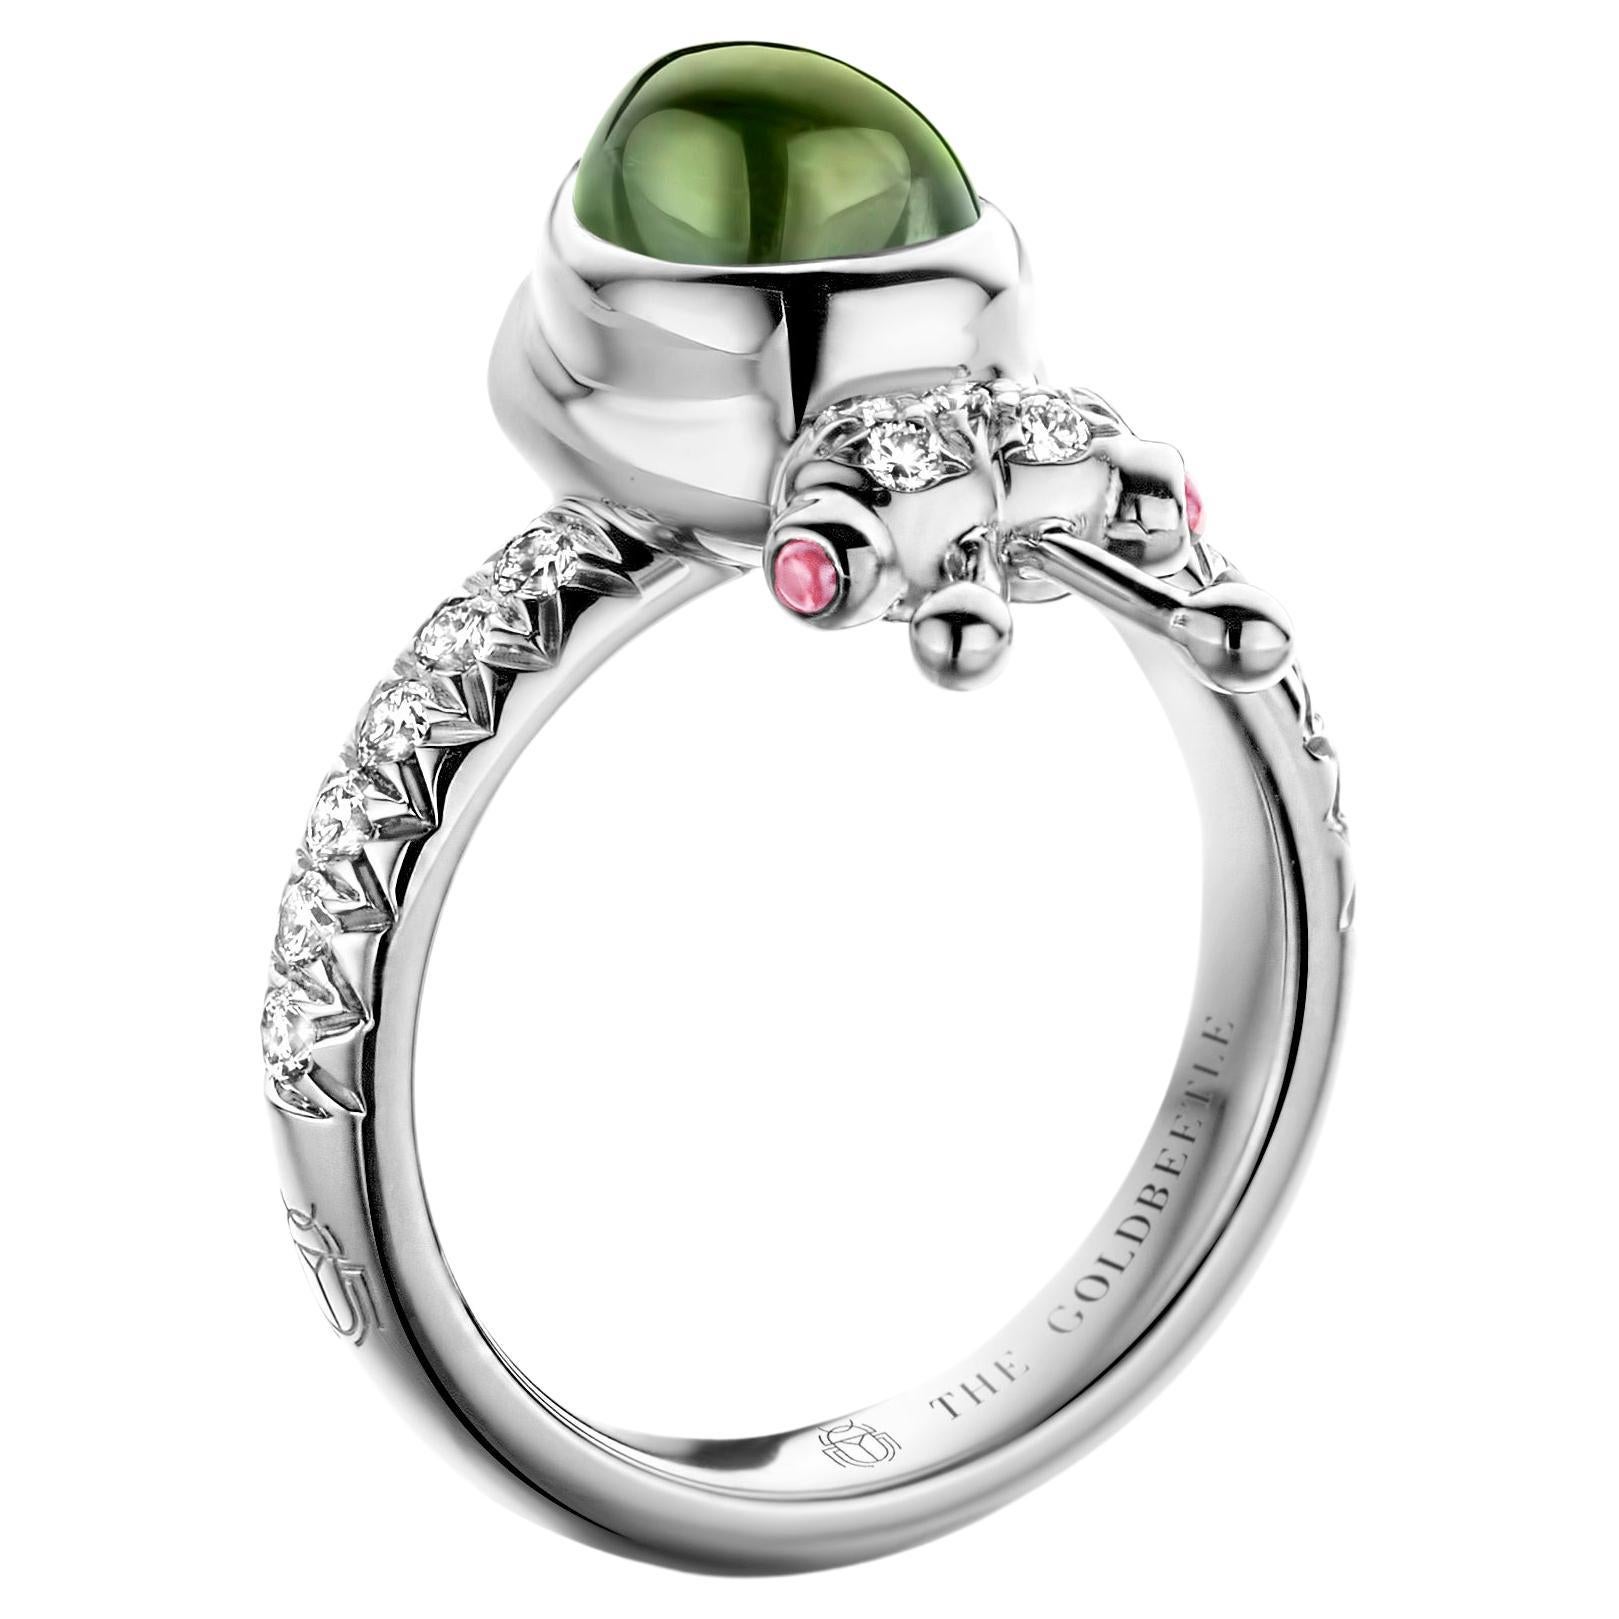 One-of-a-kind lucky beetle ring in 18-Karat white gold 8,6 g set with the finest diamonds in brilliant cut 0,34 Carat (VVS/DEF quality) one natural, green tourmaline in pear cabochon cut and two pink tourmalines in round cabochon cut.
